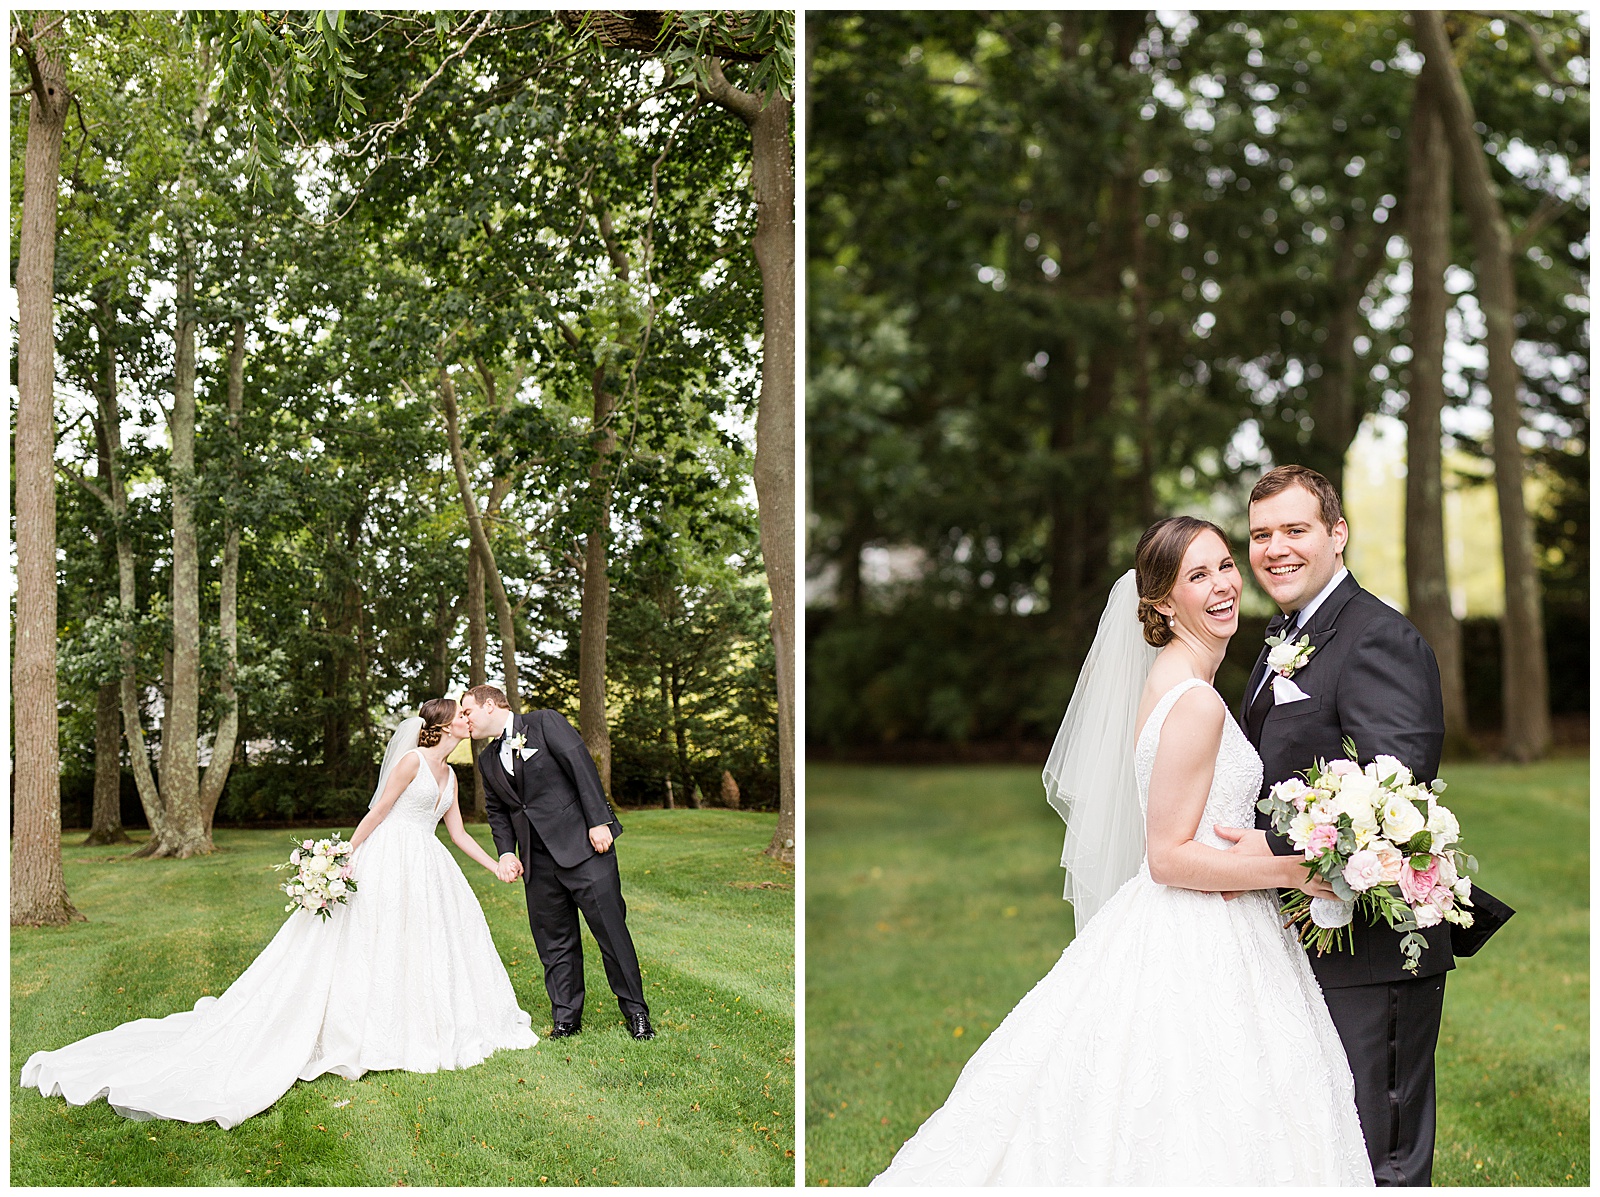 Bridal portraits in the back field of the Chanler at Cliff WAlk